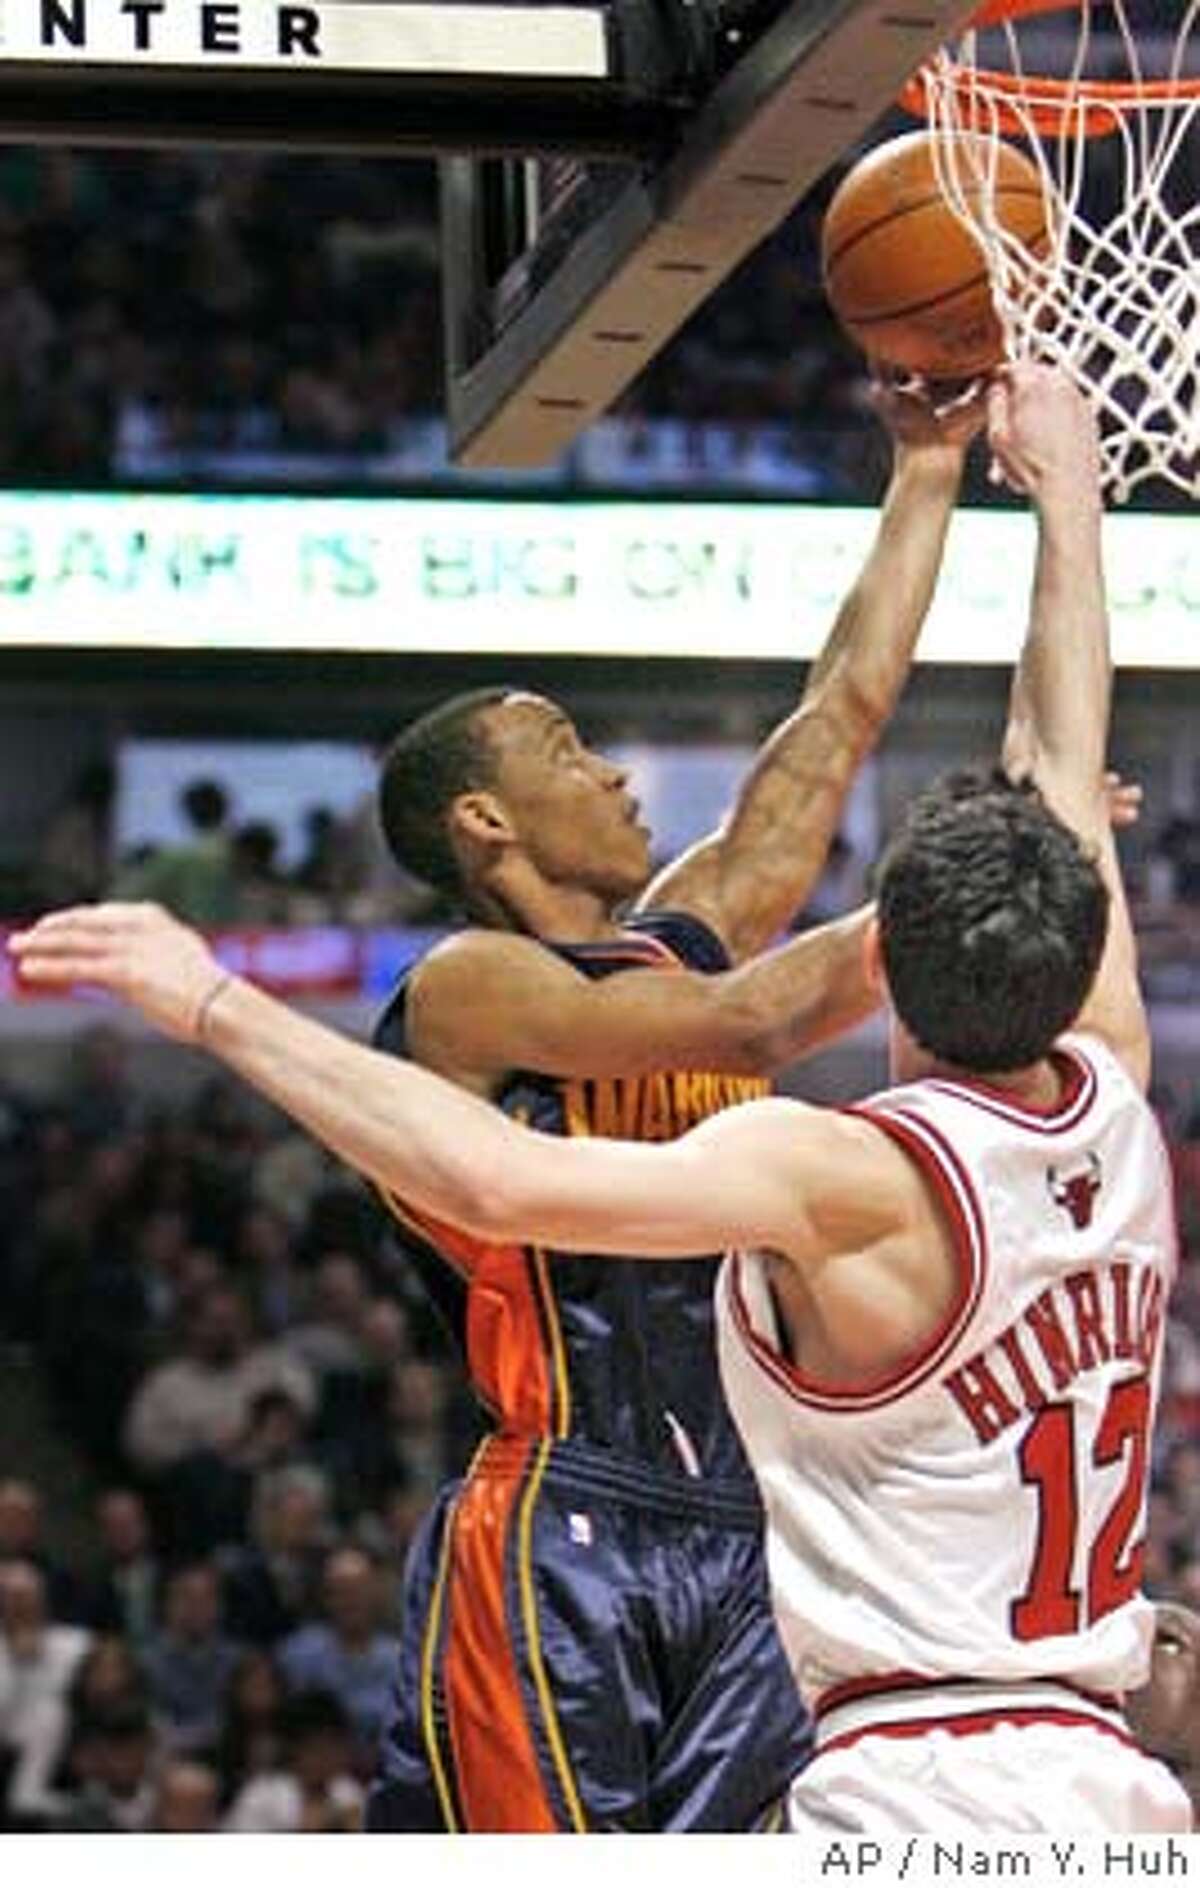 Golden State Warriors guard Monta Ellis, left, goes up for a shot against Chicago Bulls' Kirk Hinrich during the first quarter of an NBA basketball game in Chicago, Wednesday, Feb. 28, 2007.(AP Photo/Nam Y. Huh)